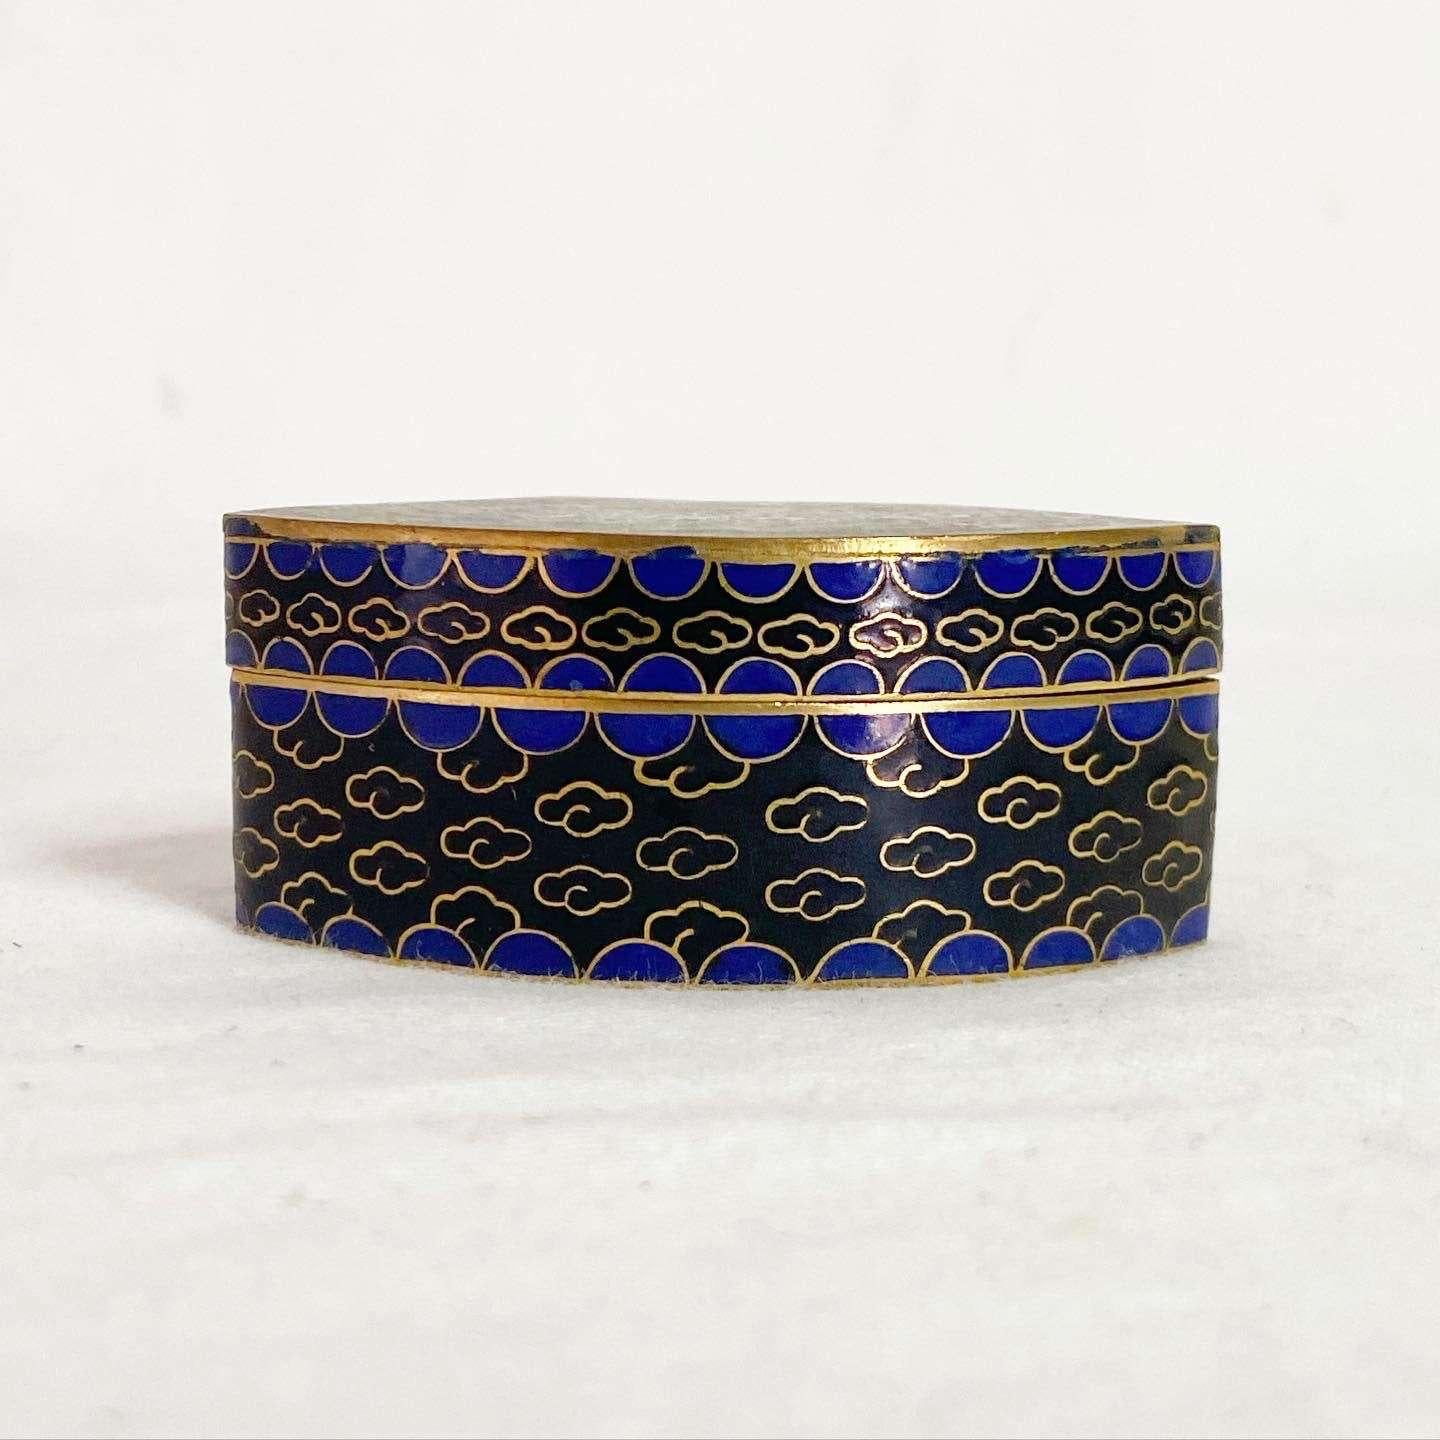 Exceptional vintage Chinese style trinket box. Features an enamel design of flowers and a bird flying ever so high.
